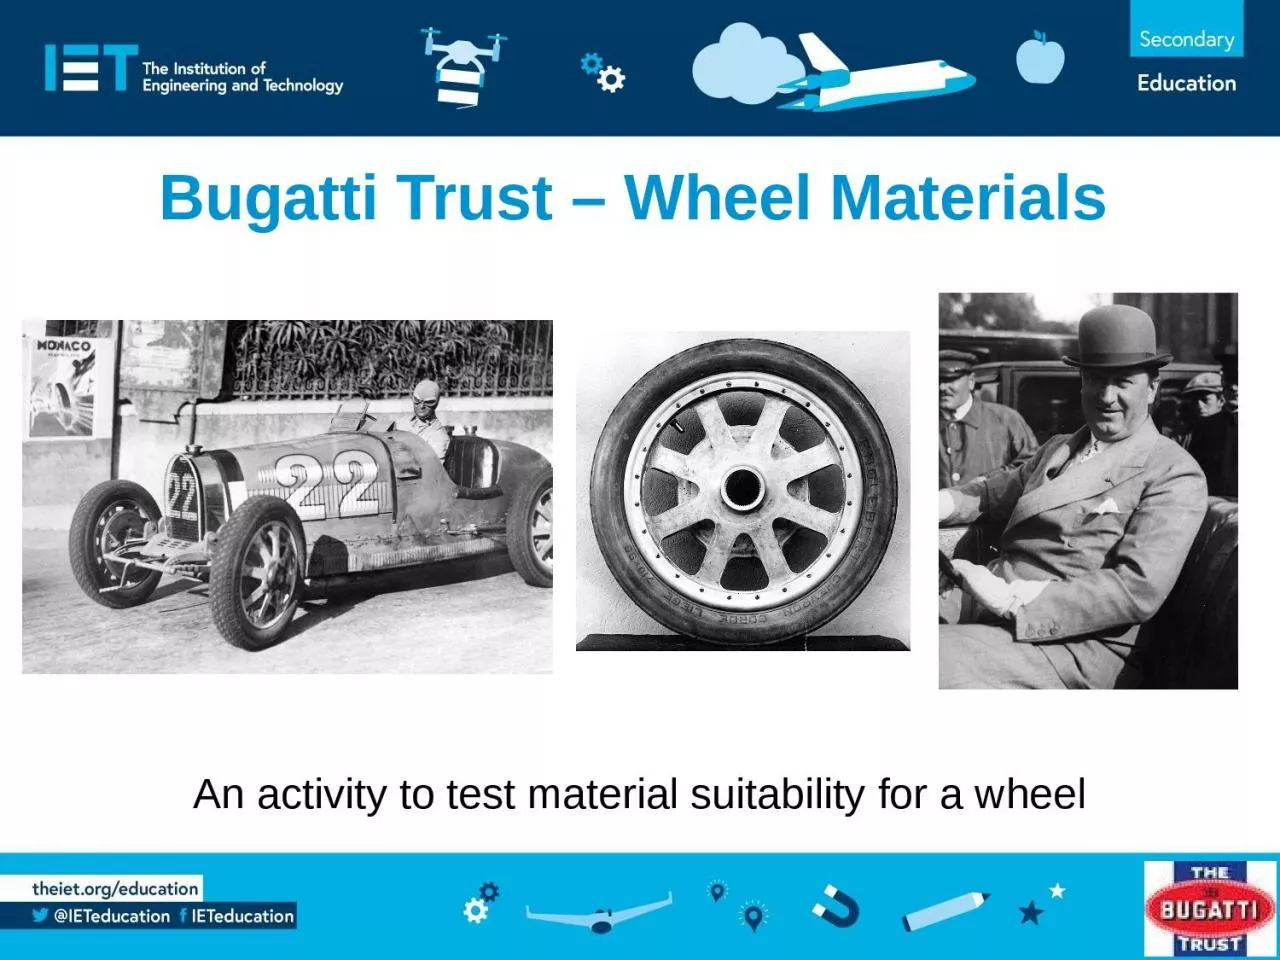 An activity to test material suitability for a wheel